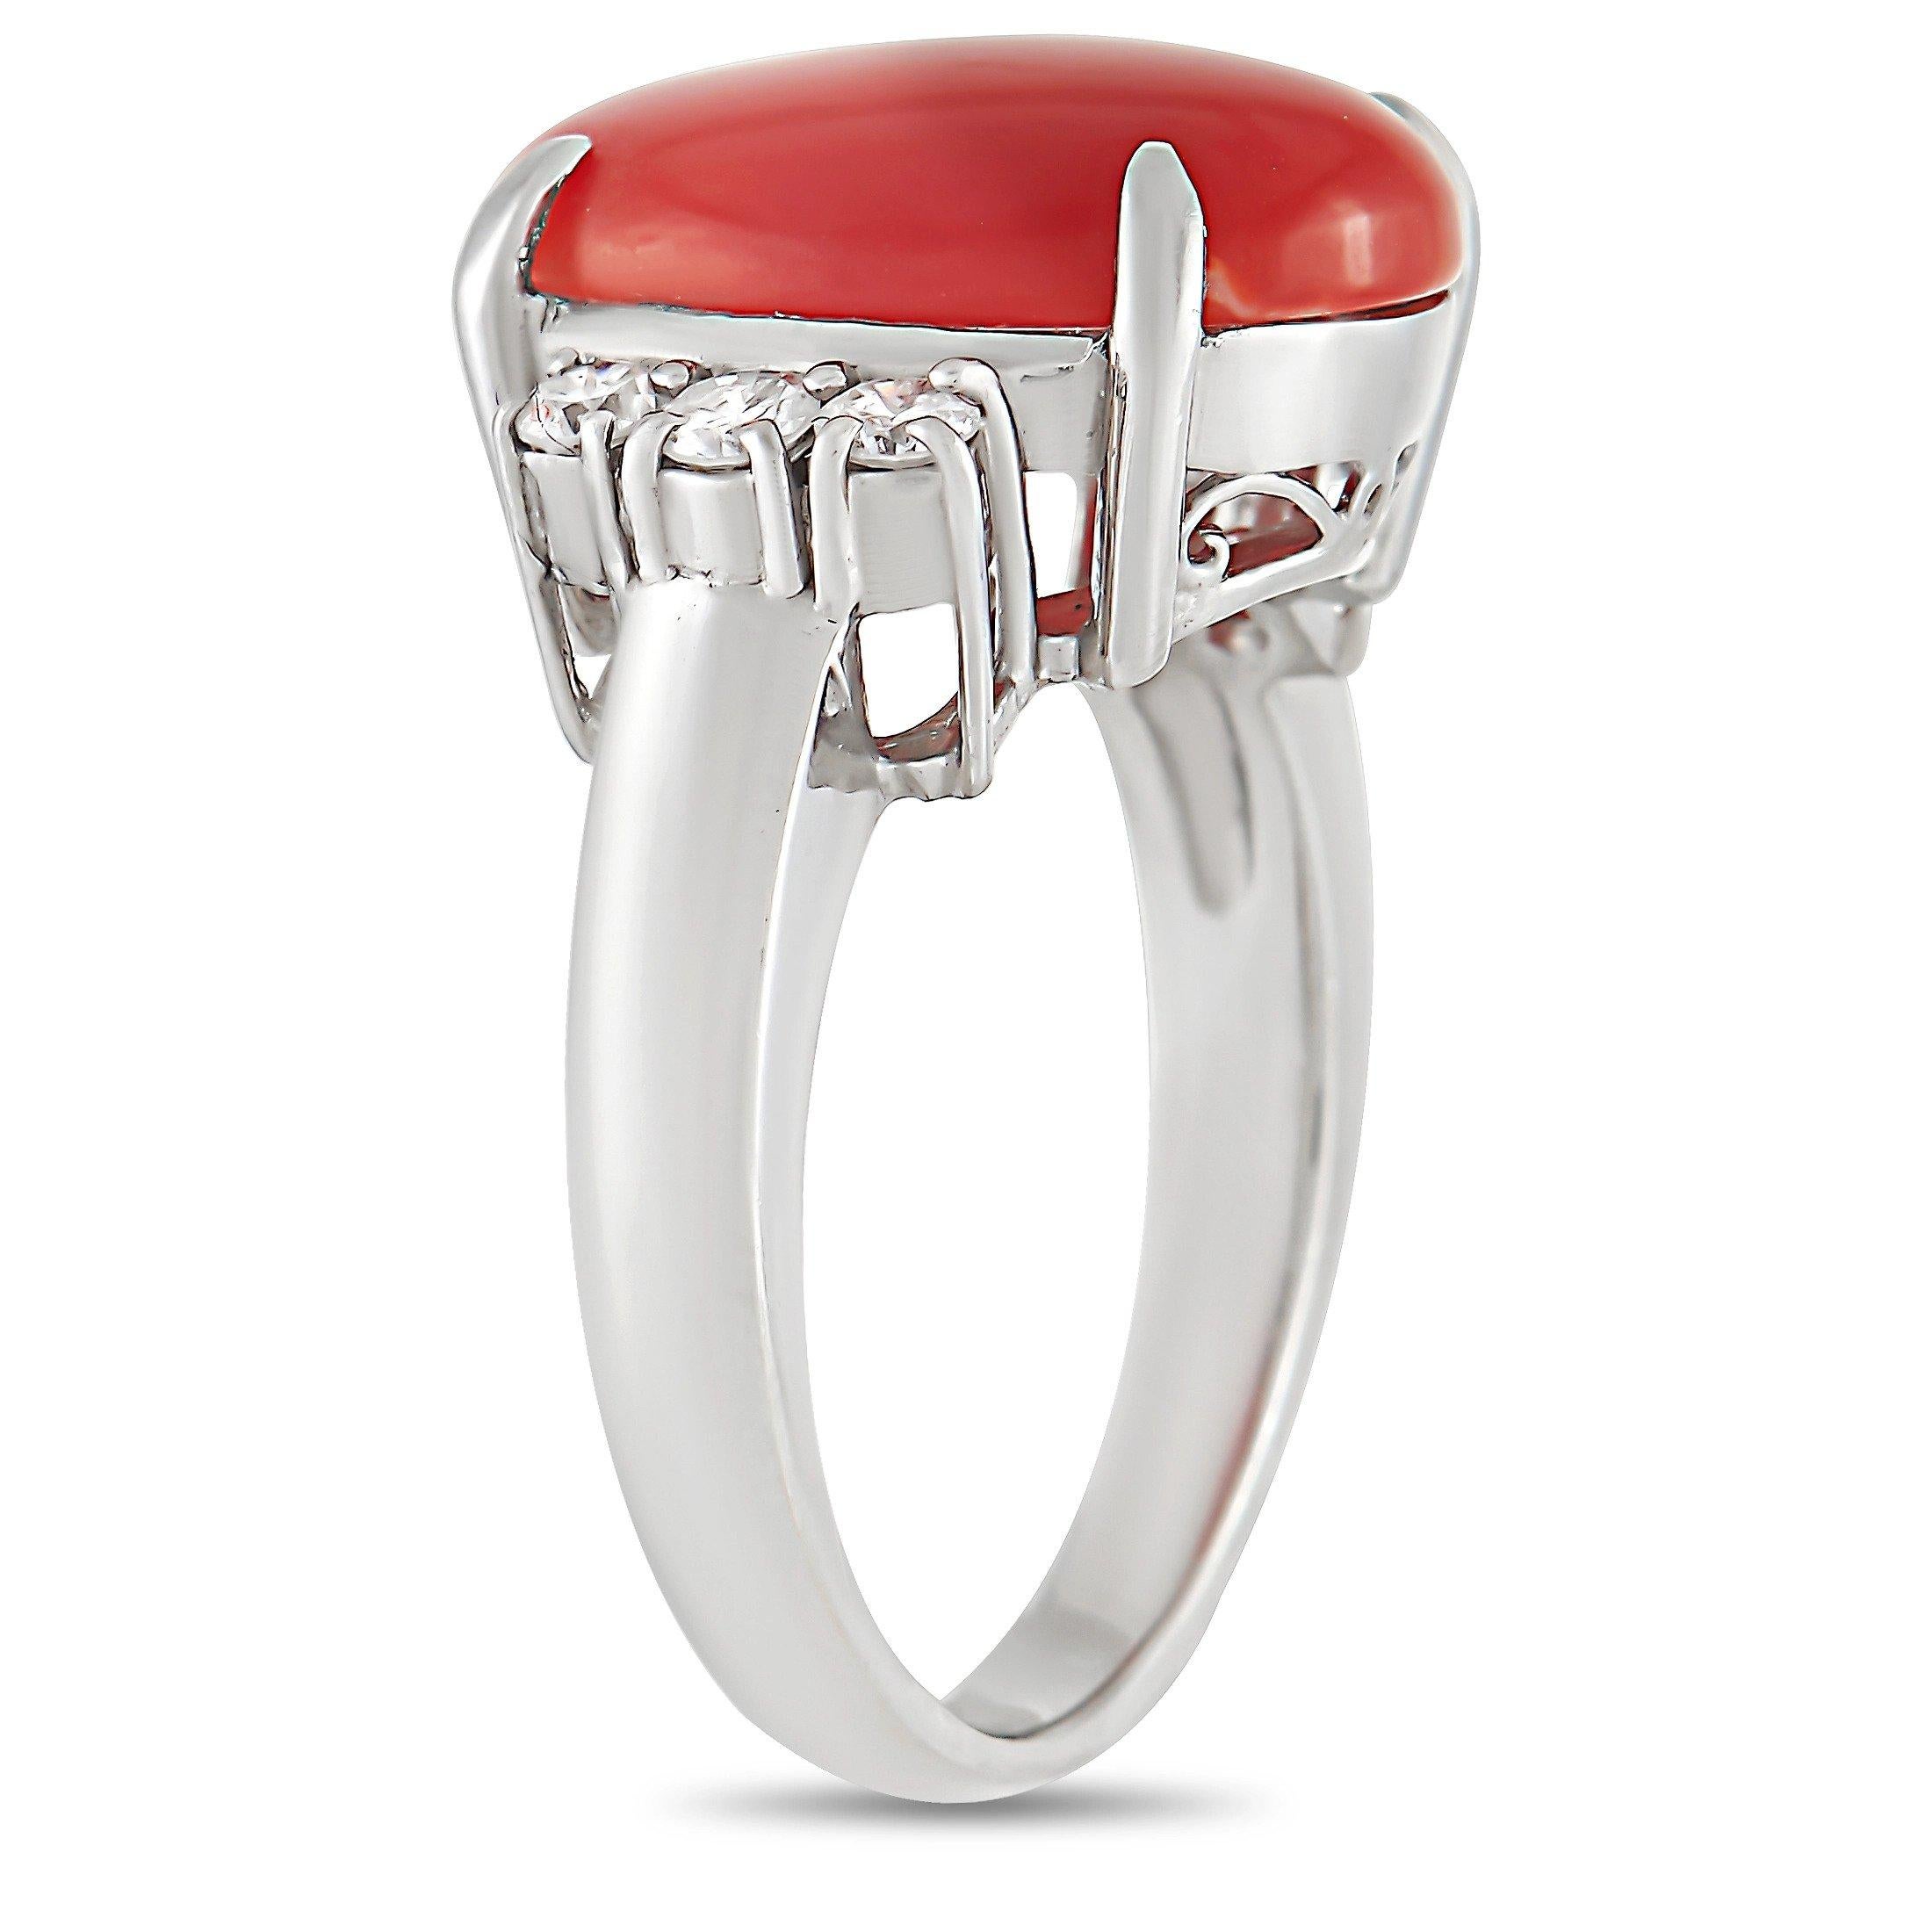 This LB Exclusive Platinum 0.31 ct Diamond 4.20 ct Coral Ring is sure to attract attention. The simple band is made with platinum and showcases the beautiful 4.20 carat oval coral center stone. The coral is flanked on either side by a row of three